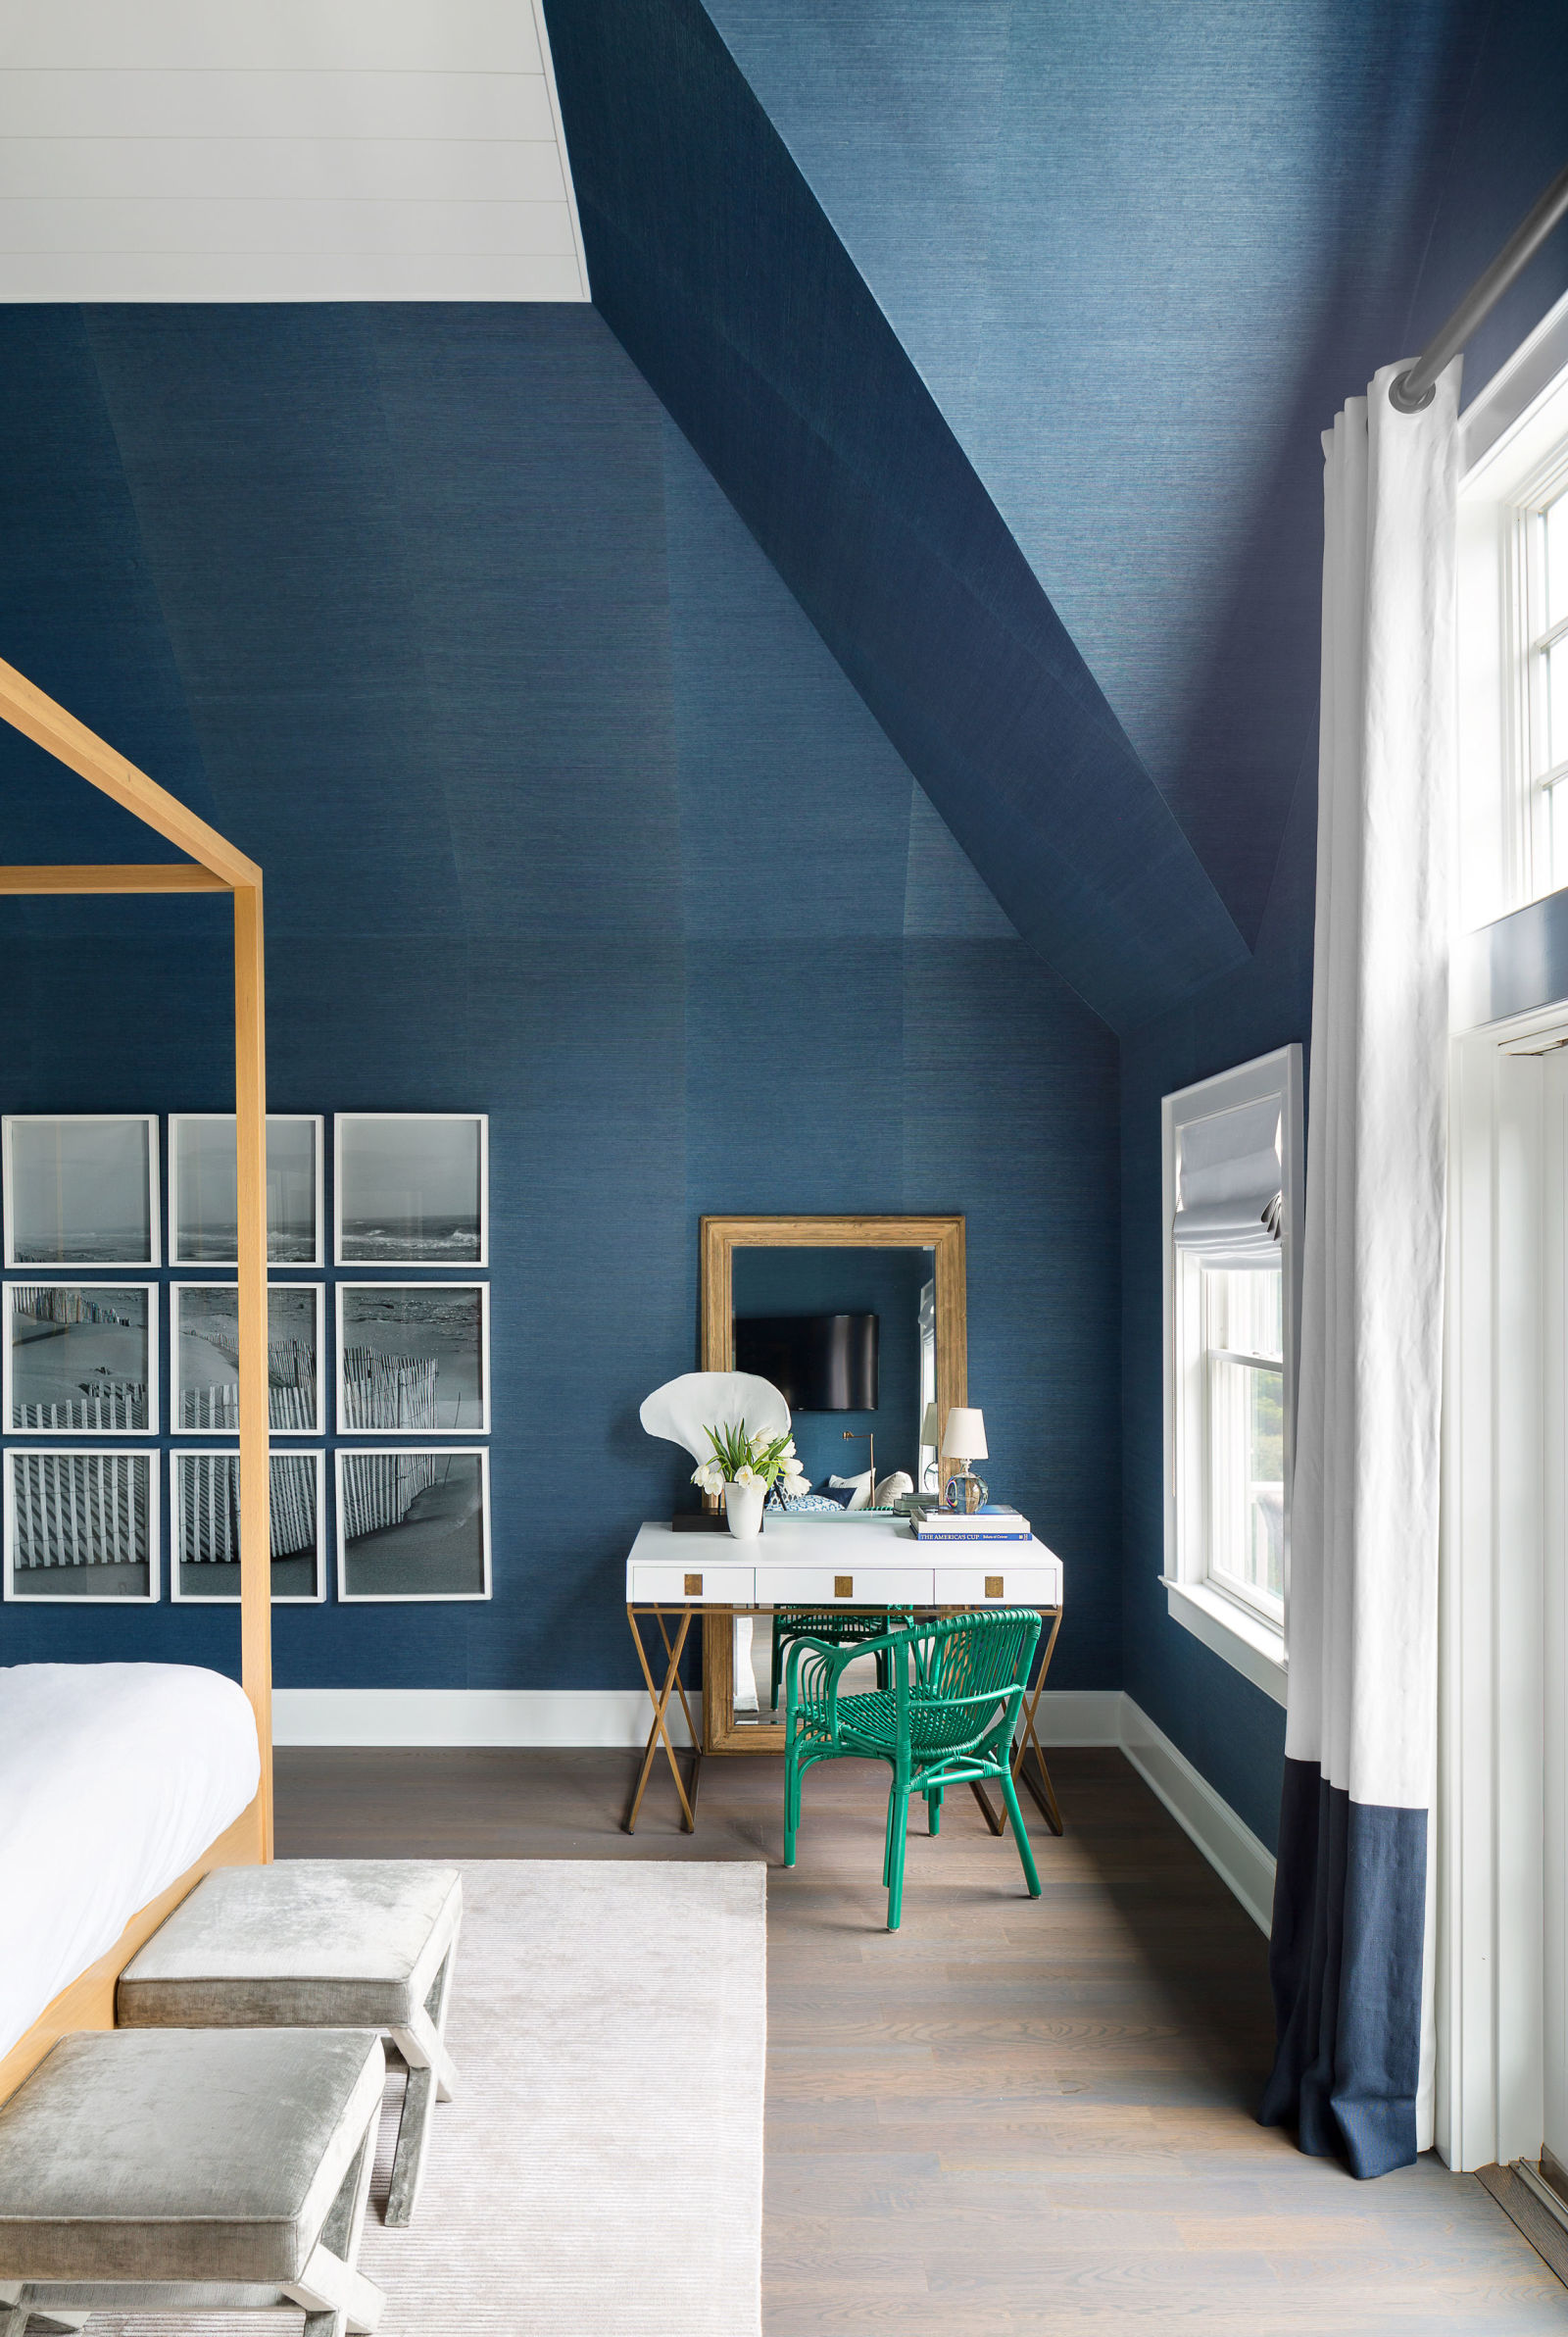 Home Decor Color Trends Everyone Will be Talking About in 2017